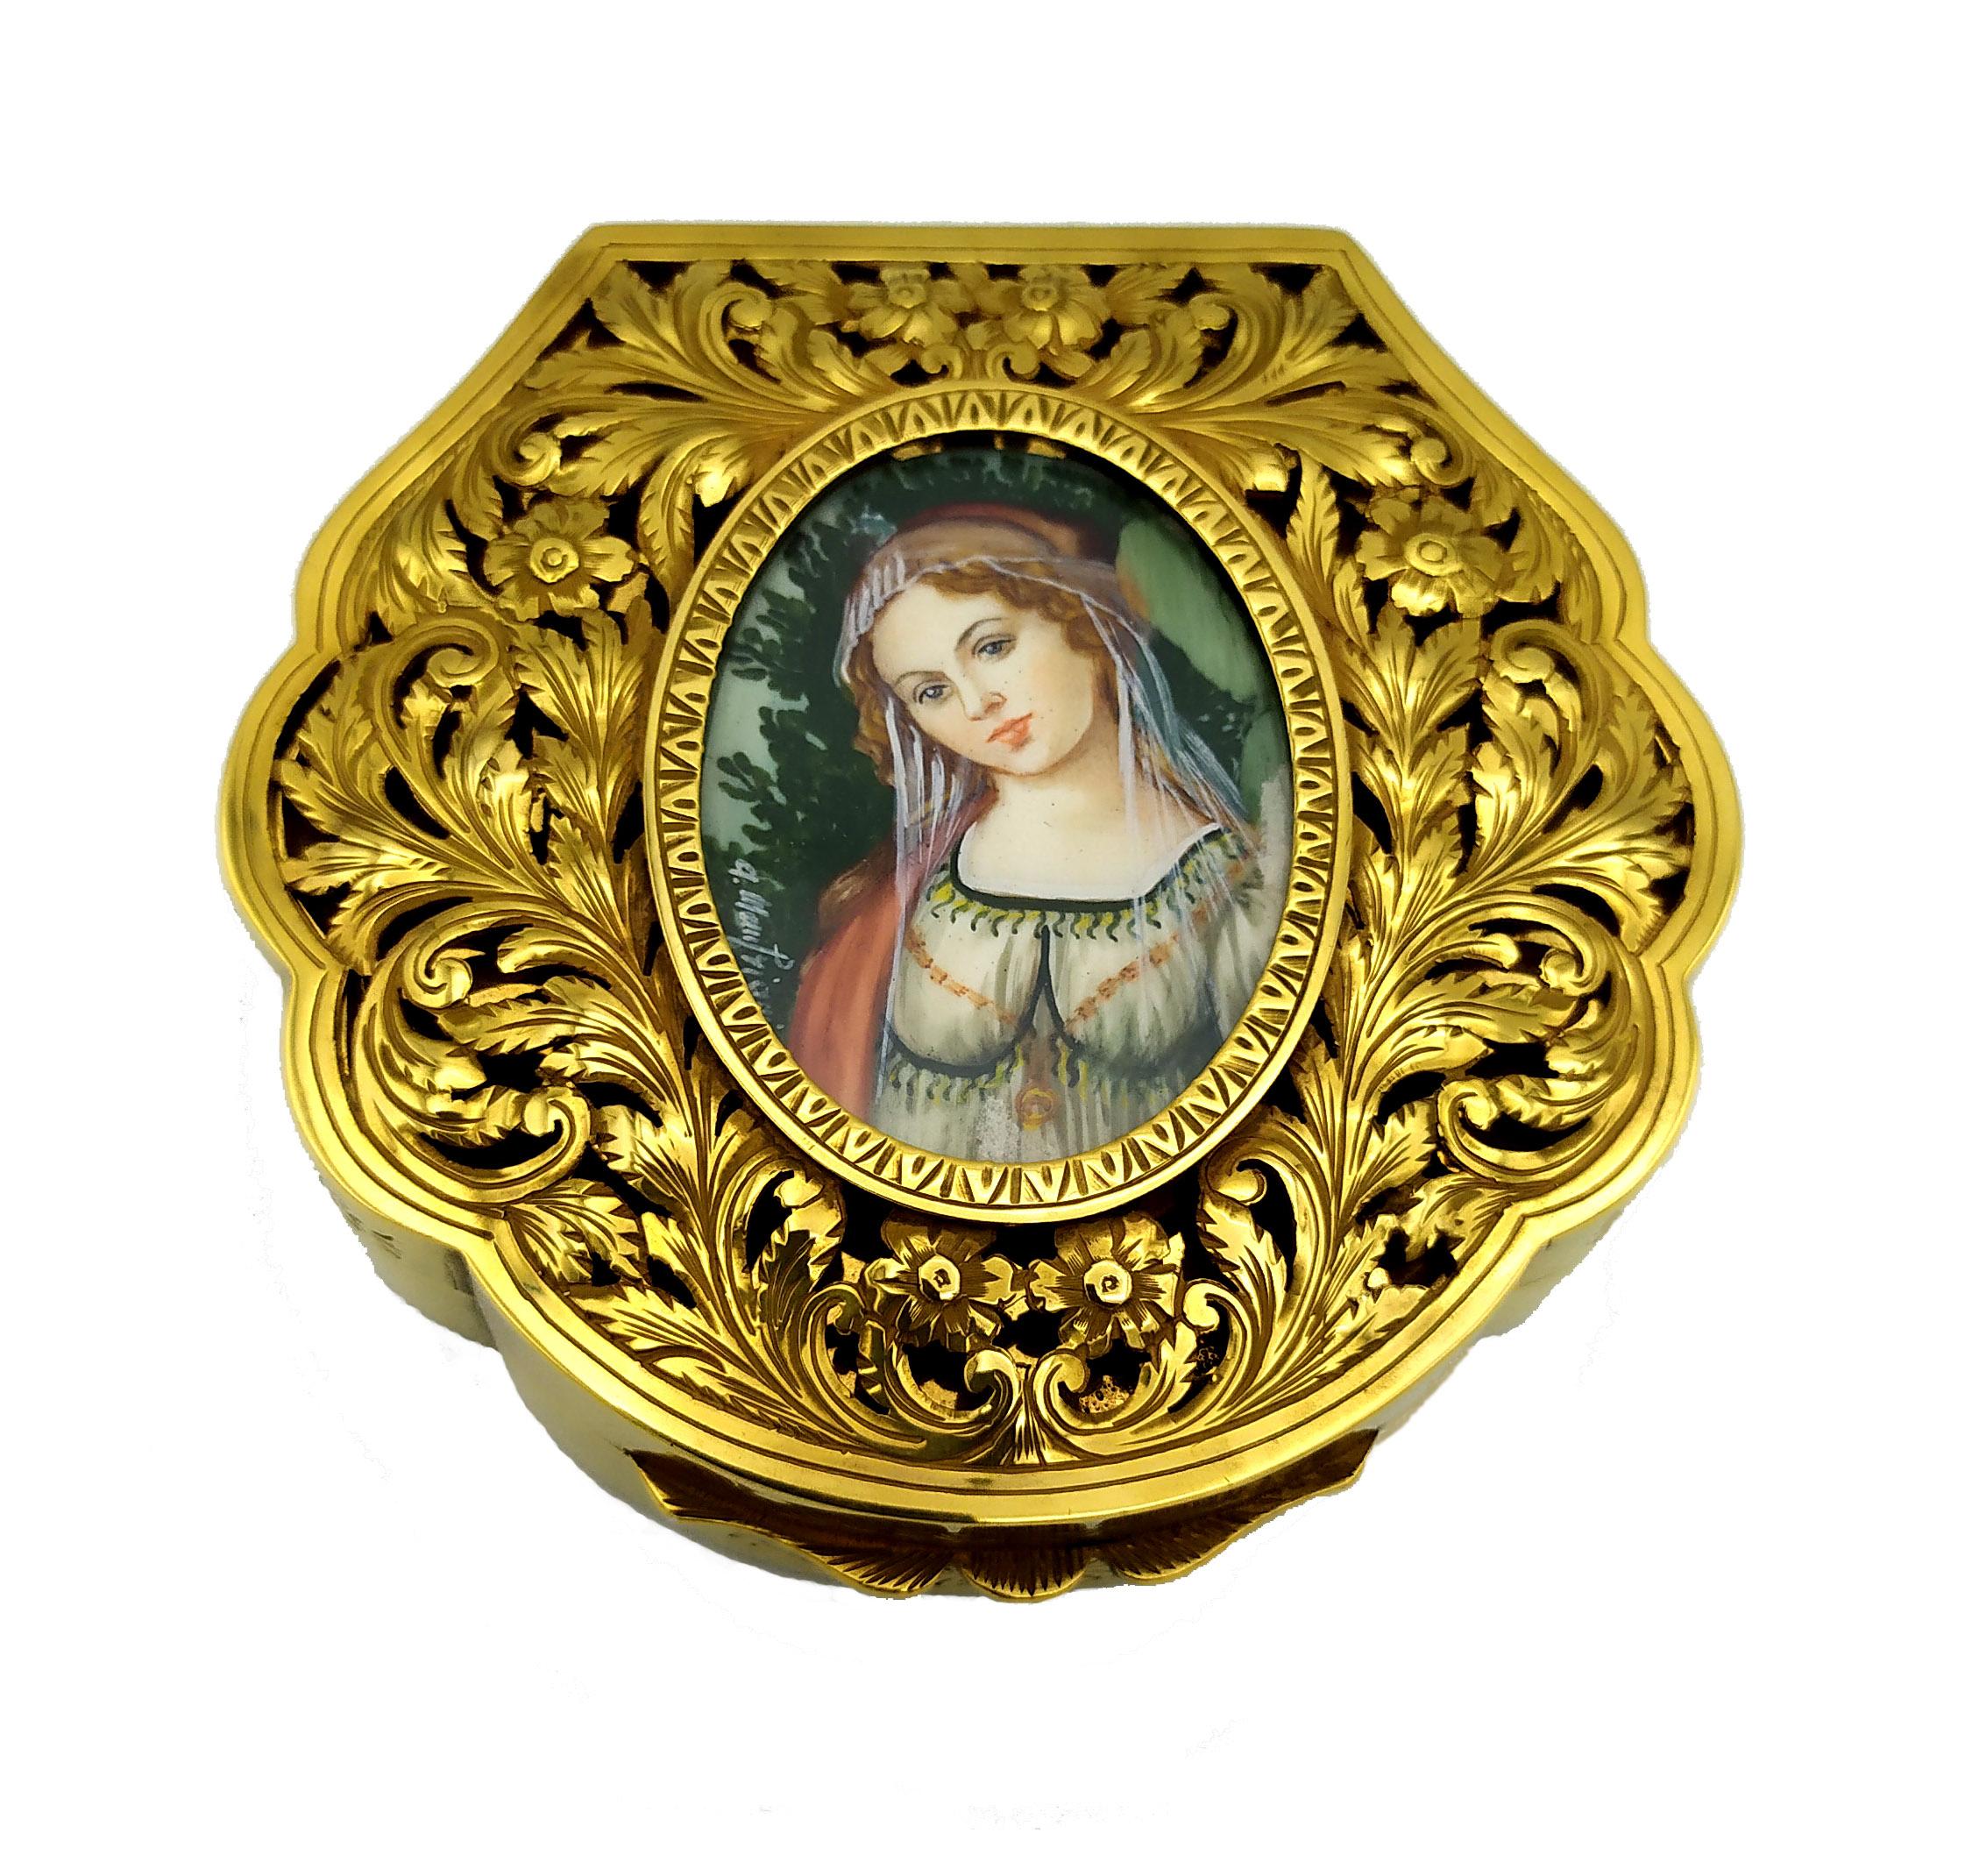 Shaped snuffbox in 925/1000 sterling silver gold plated with perforated, embossed and hand-engraved lid, with fine oval miniature cm. 3.2 x 4.5 hand painted in tempera on vegetable ivory by the painter Anna Maria Manfriani reproducing a detail of